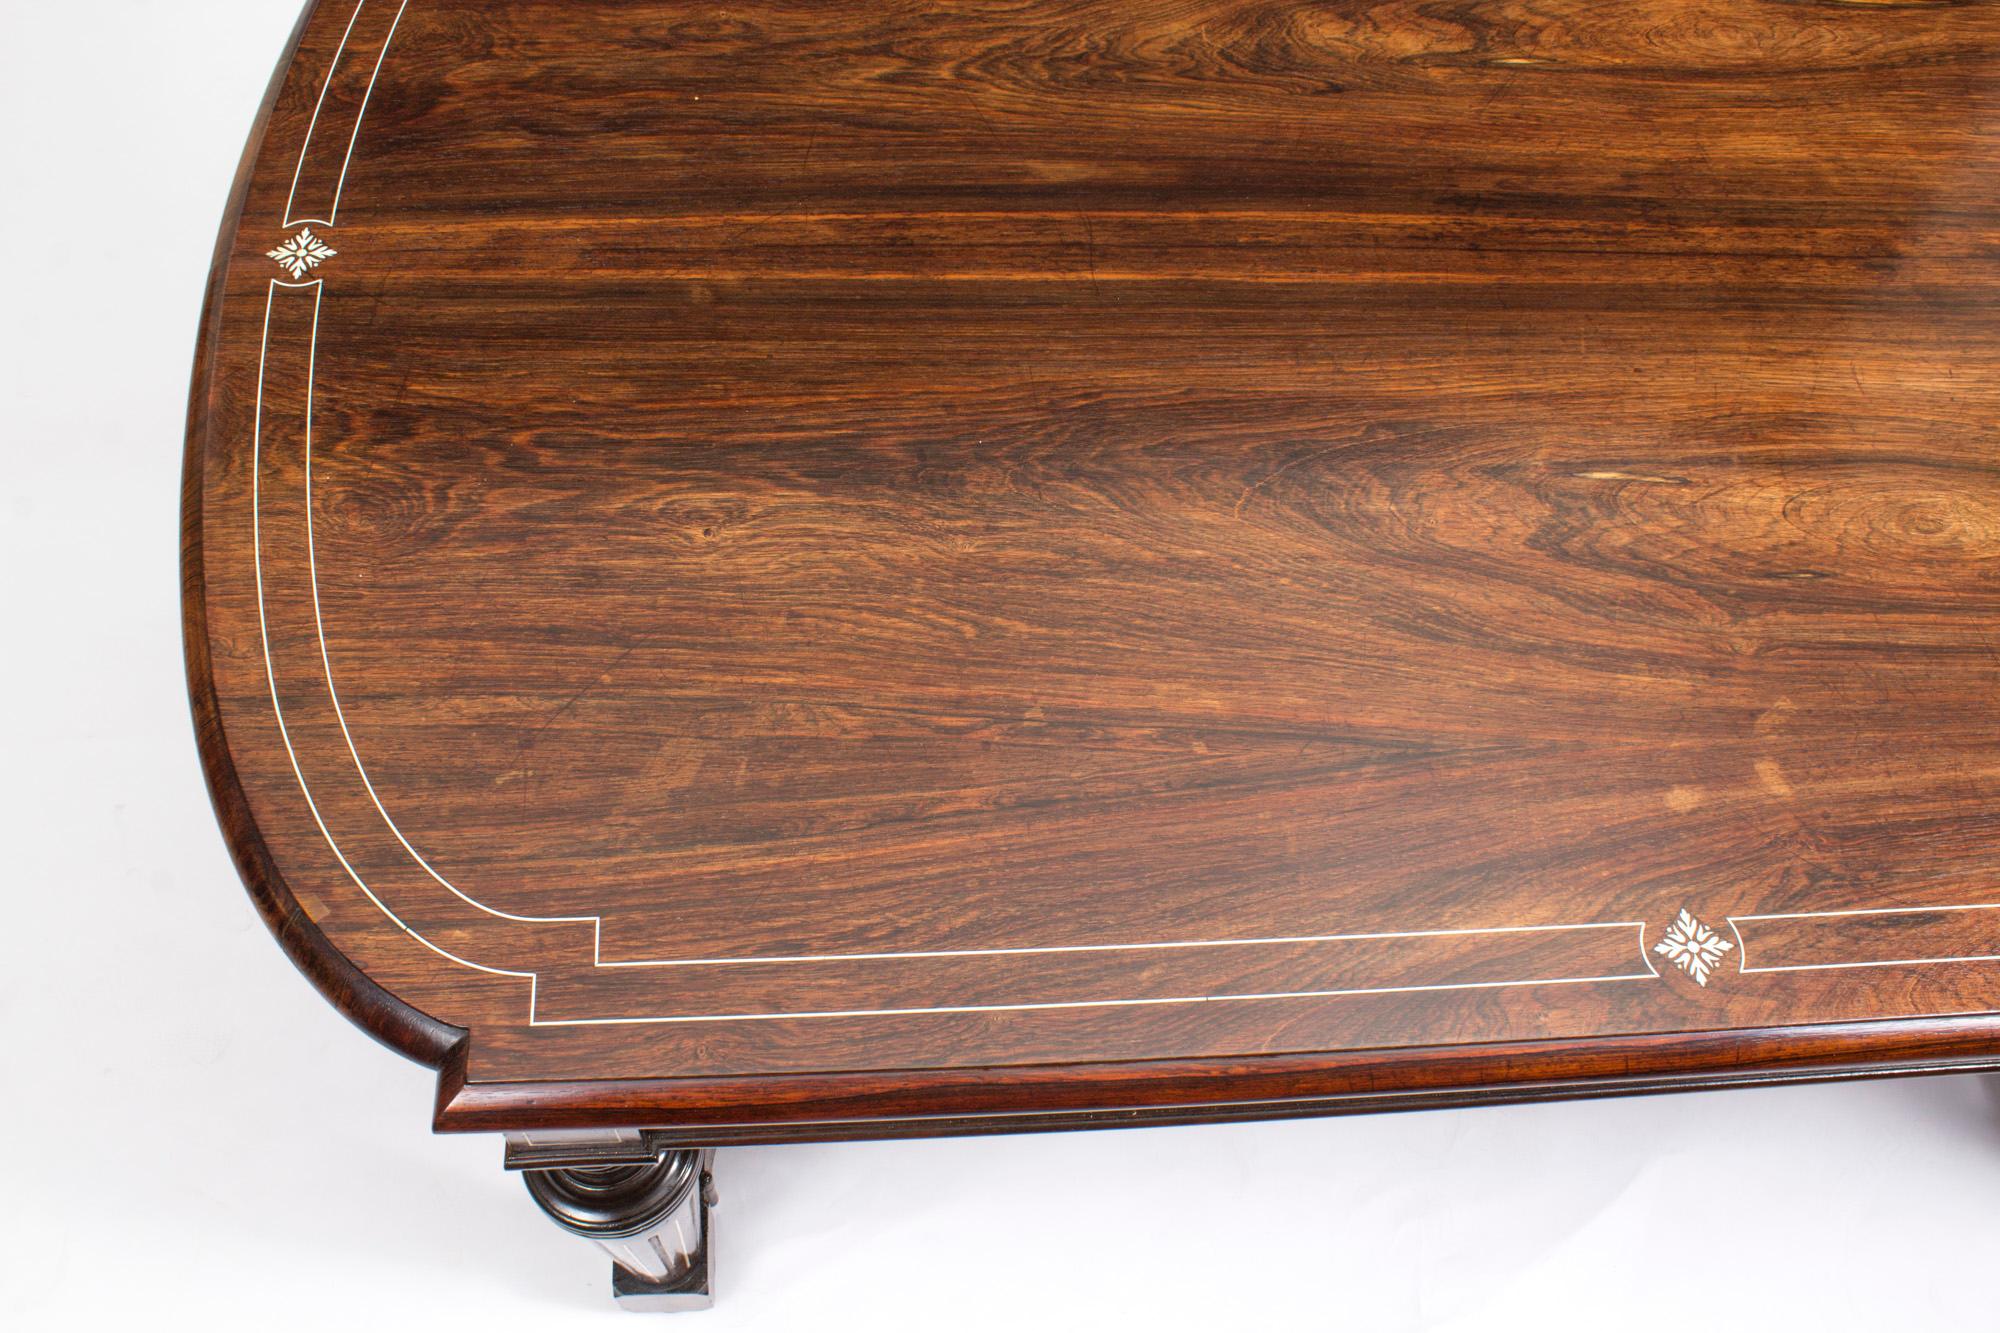 Victorian Antique Inlaid Gonçalo Alves Inlaid Coffee Table, 19th Century